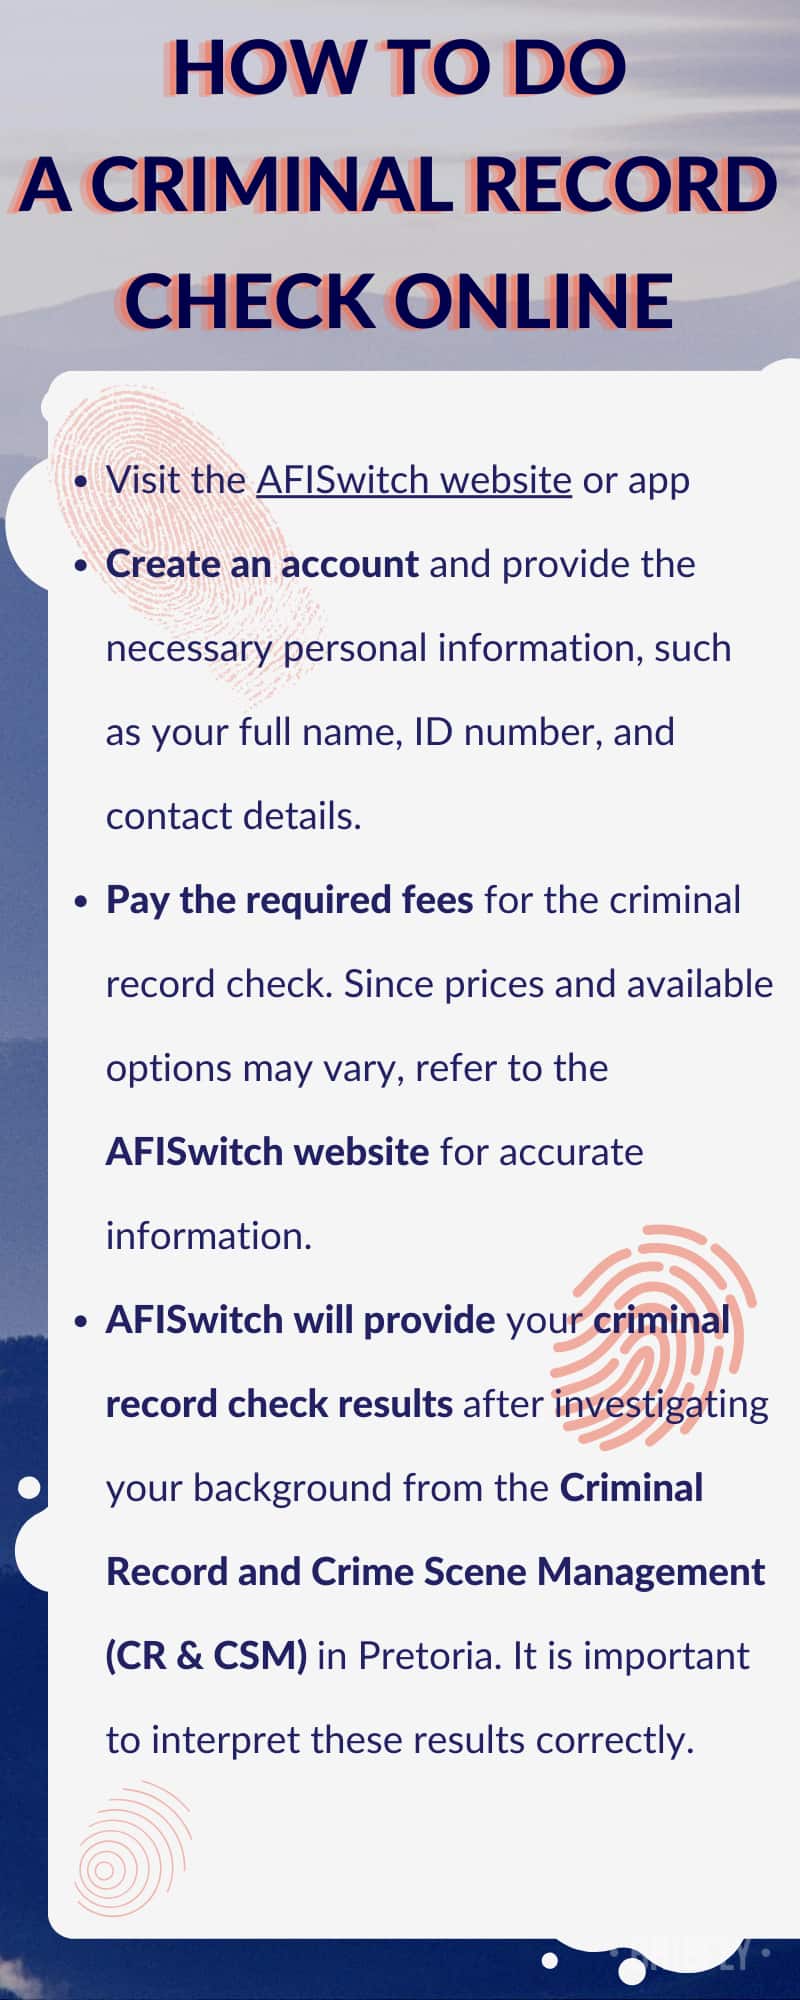 Criminal record check online in South Africa